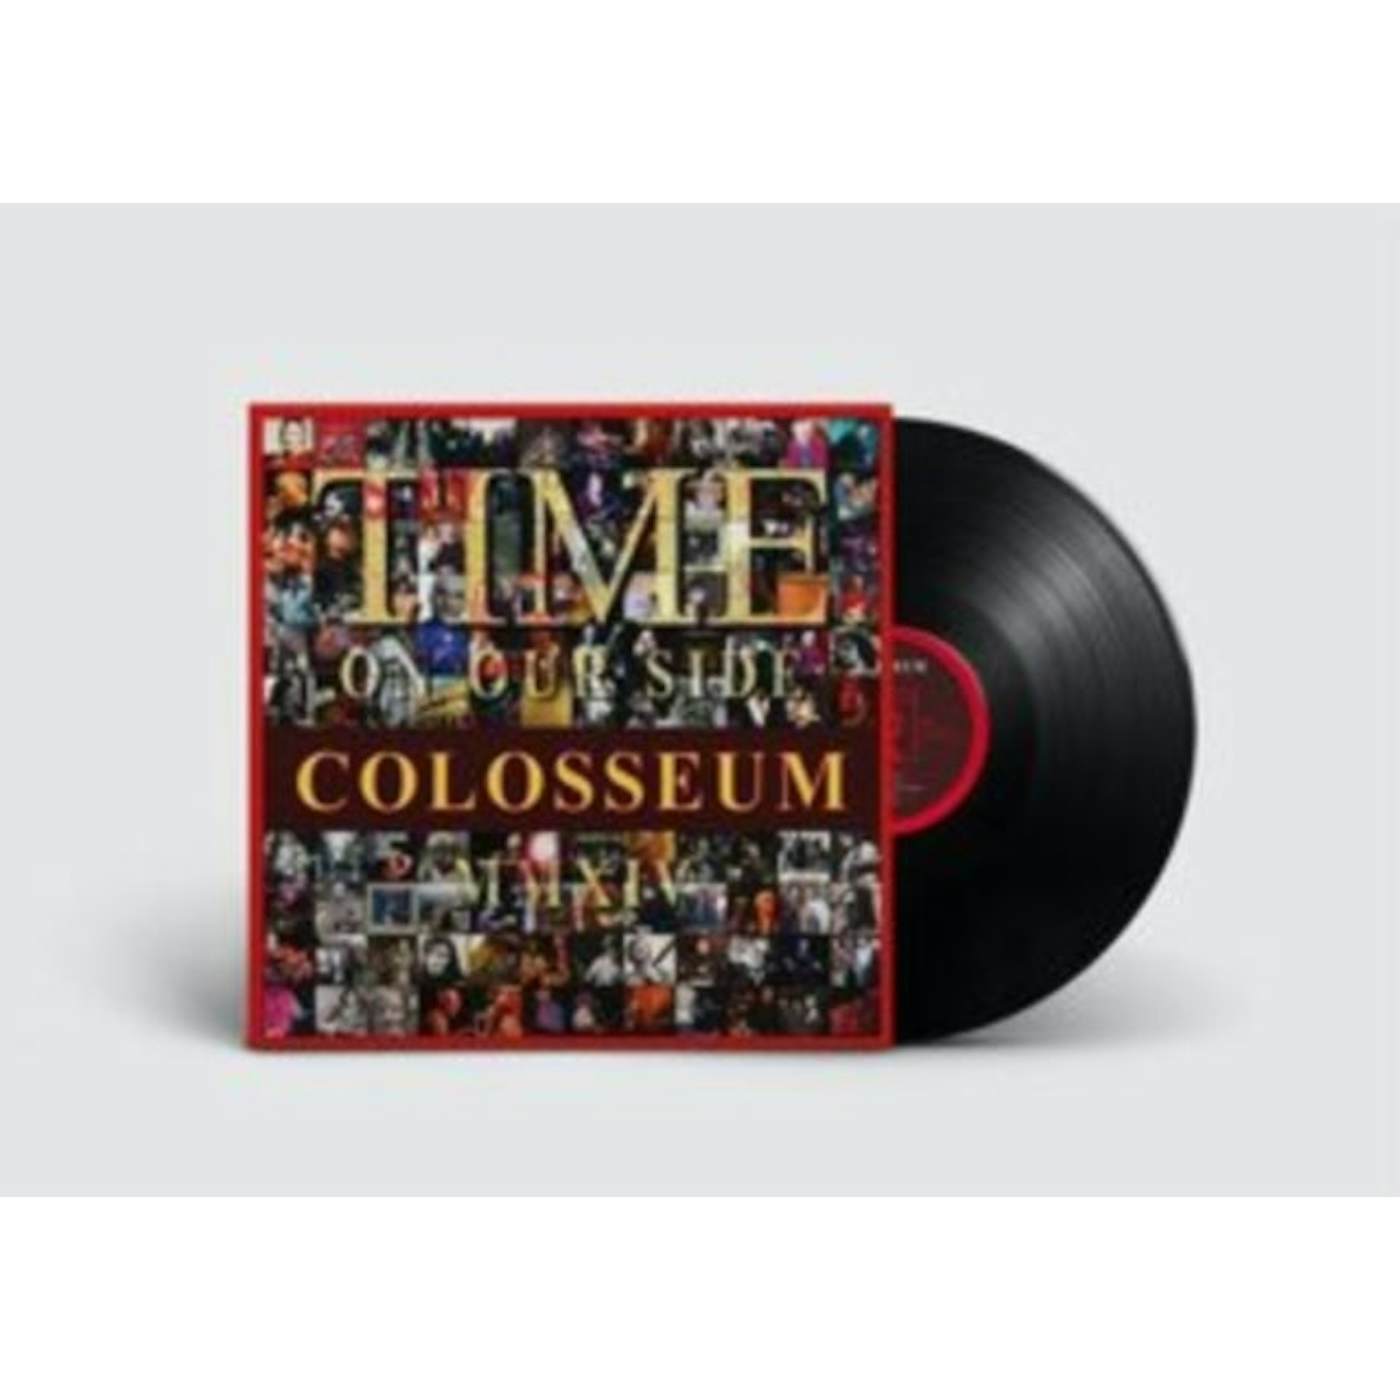 Colosseum LP - Time On Our Side (Vinyl)